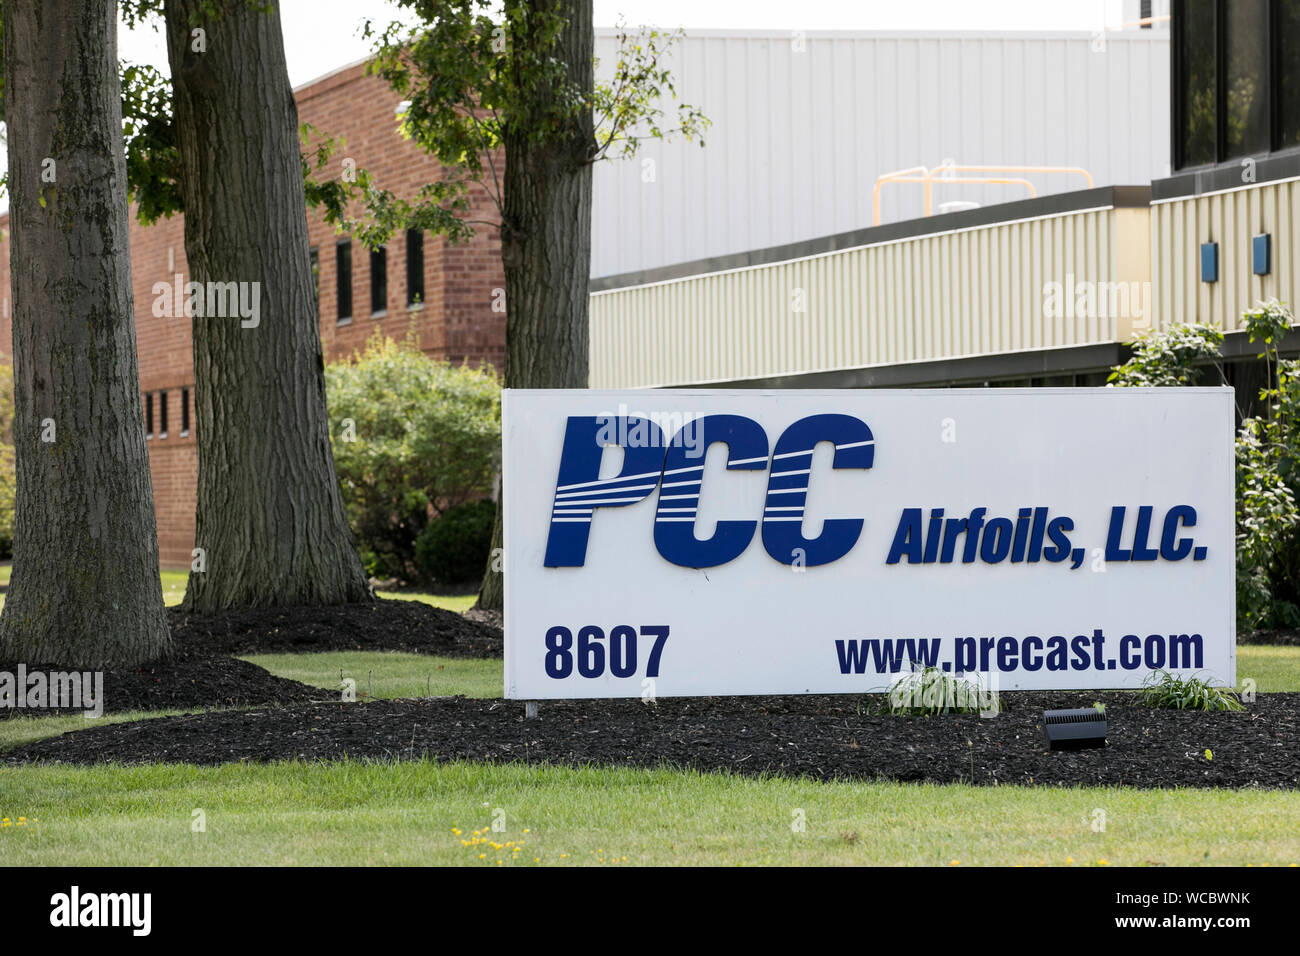 A logo sign outside of a facility occupied by PCC Airfoils (Performance Cast Parts) in Mentor, Ohio on August 11, 2019. Stock Photo